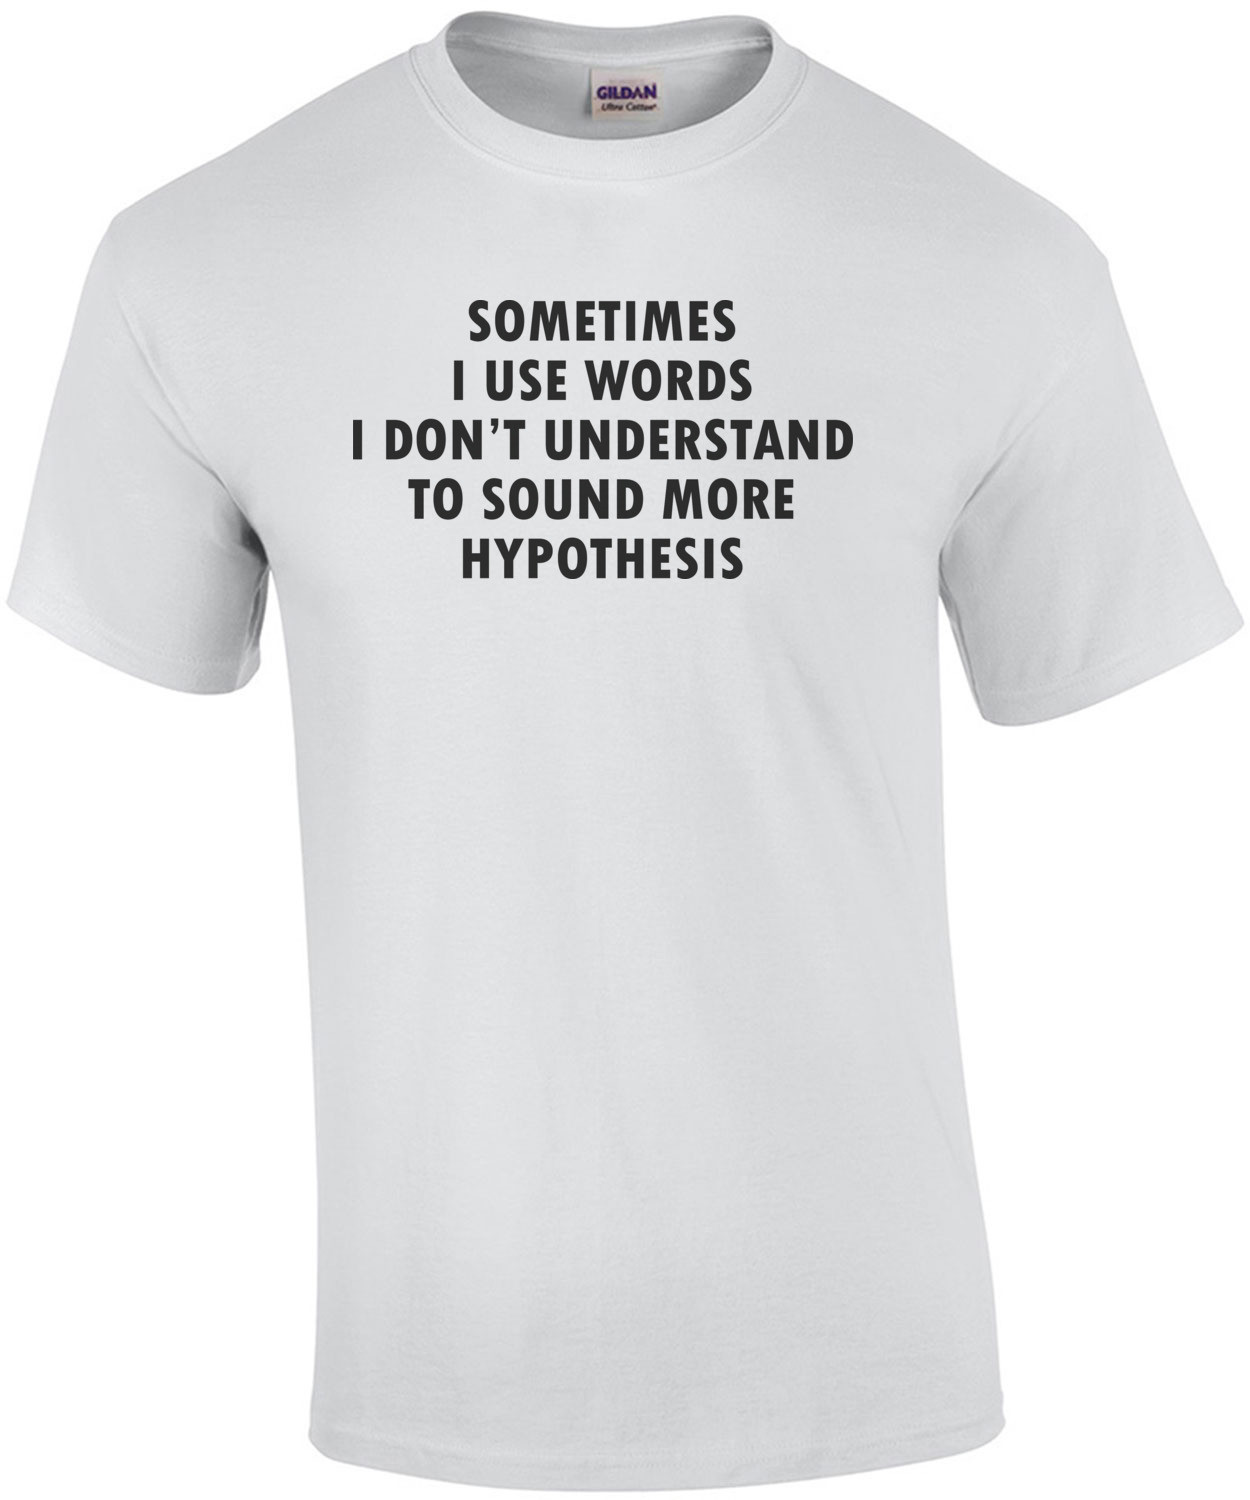 Sometimes I Use Words I Don't Understand To Sound Hypothesis shirt